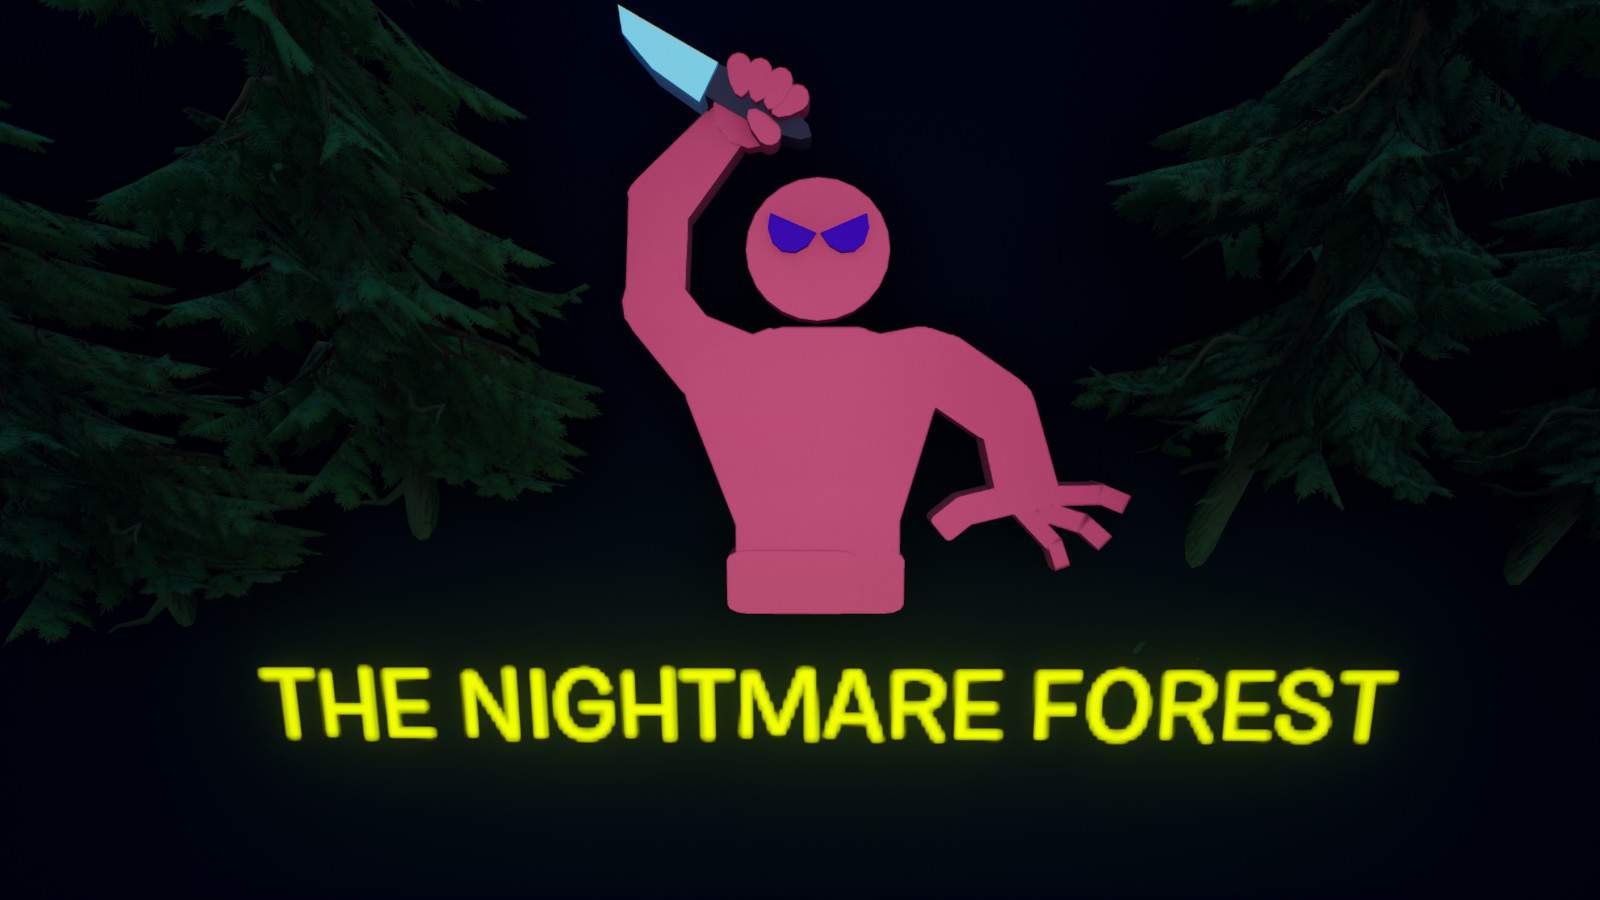 THE NIGHTMARE FOREST